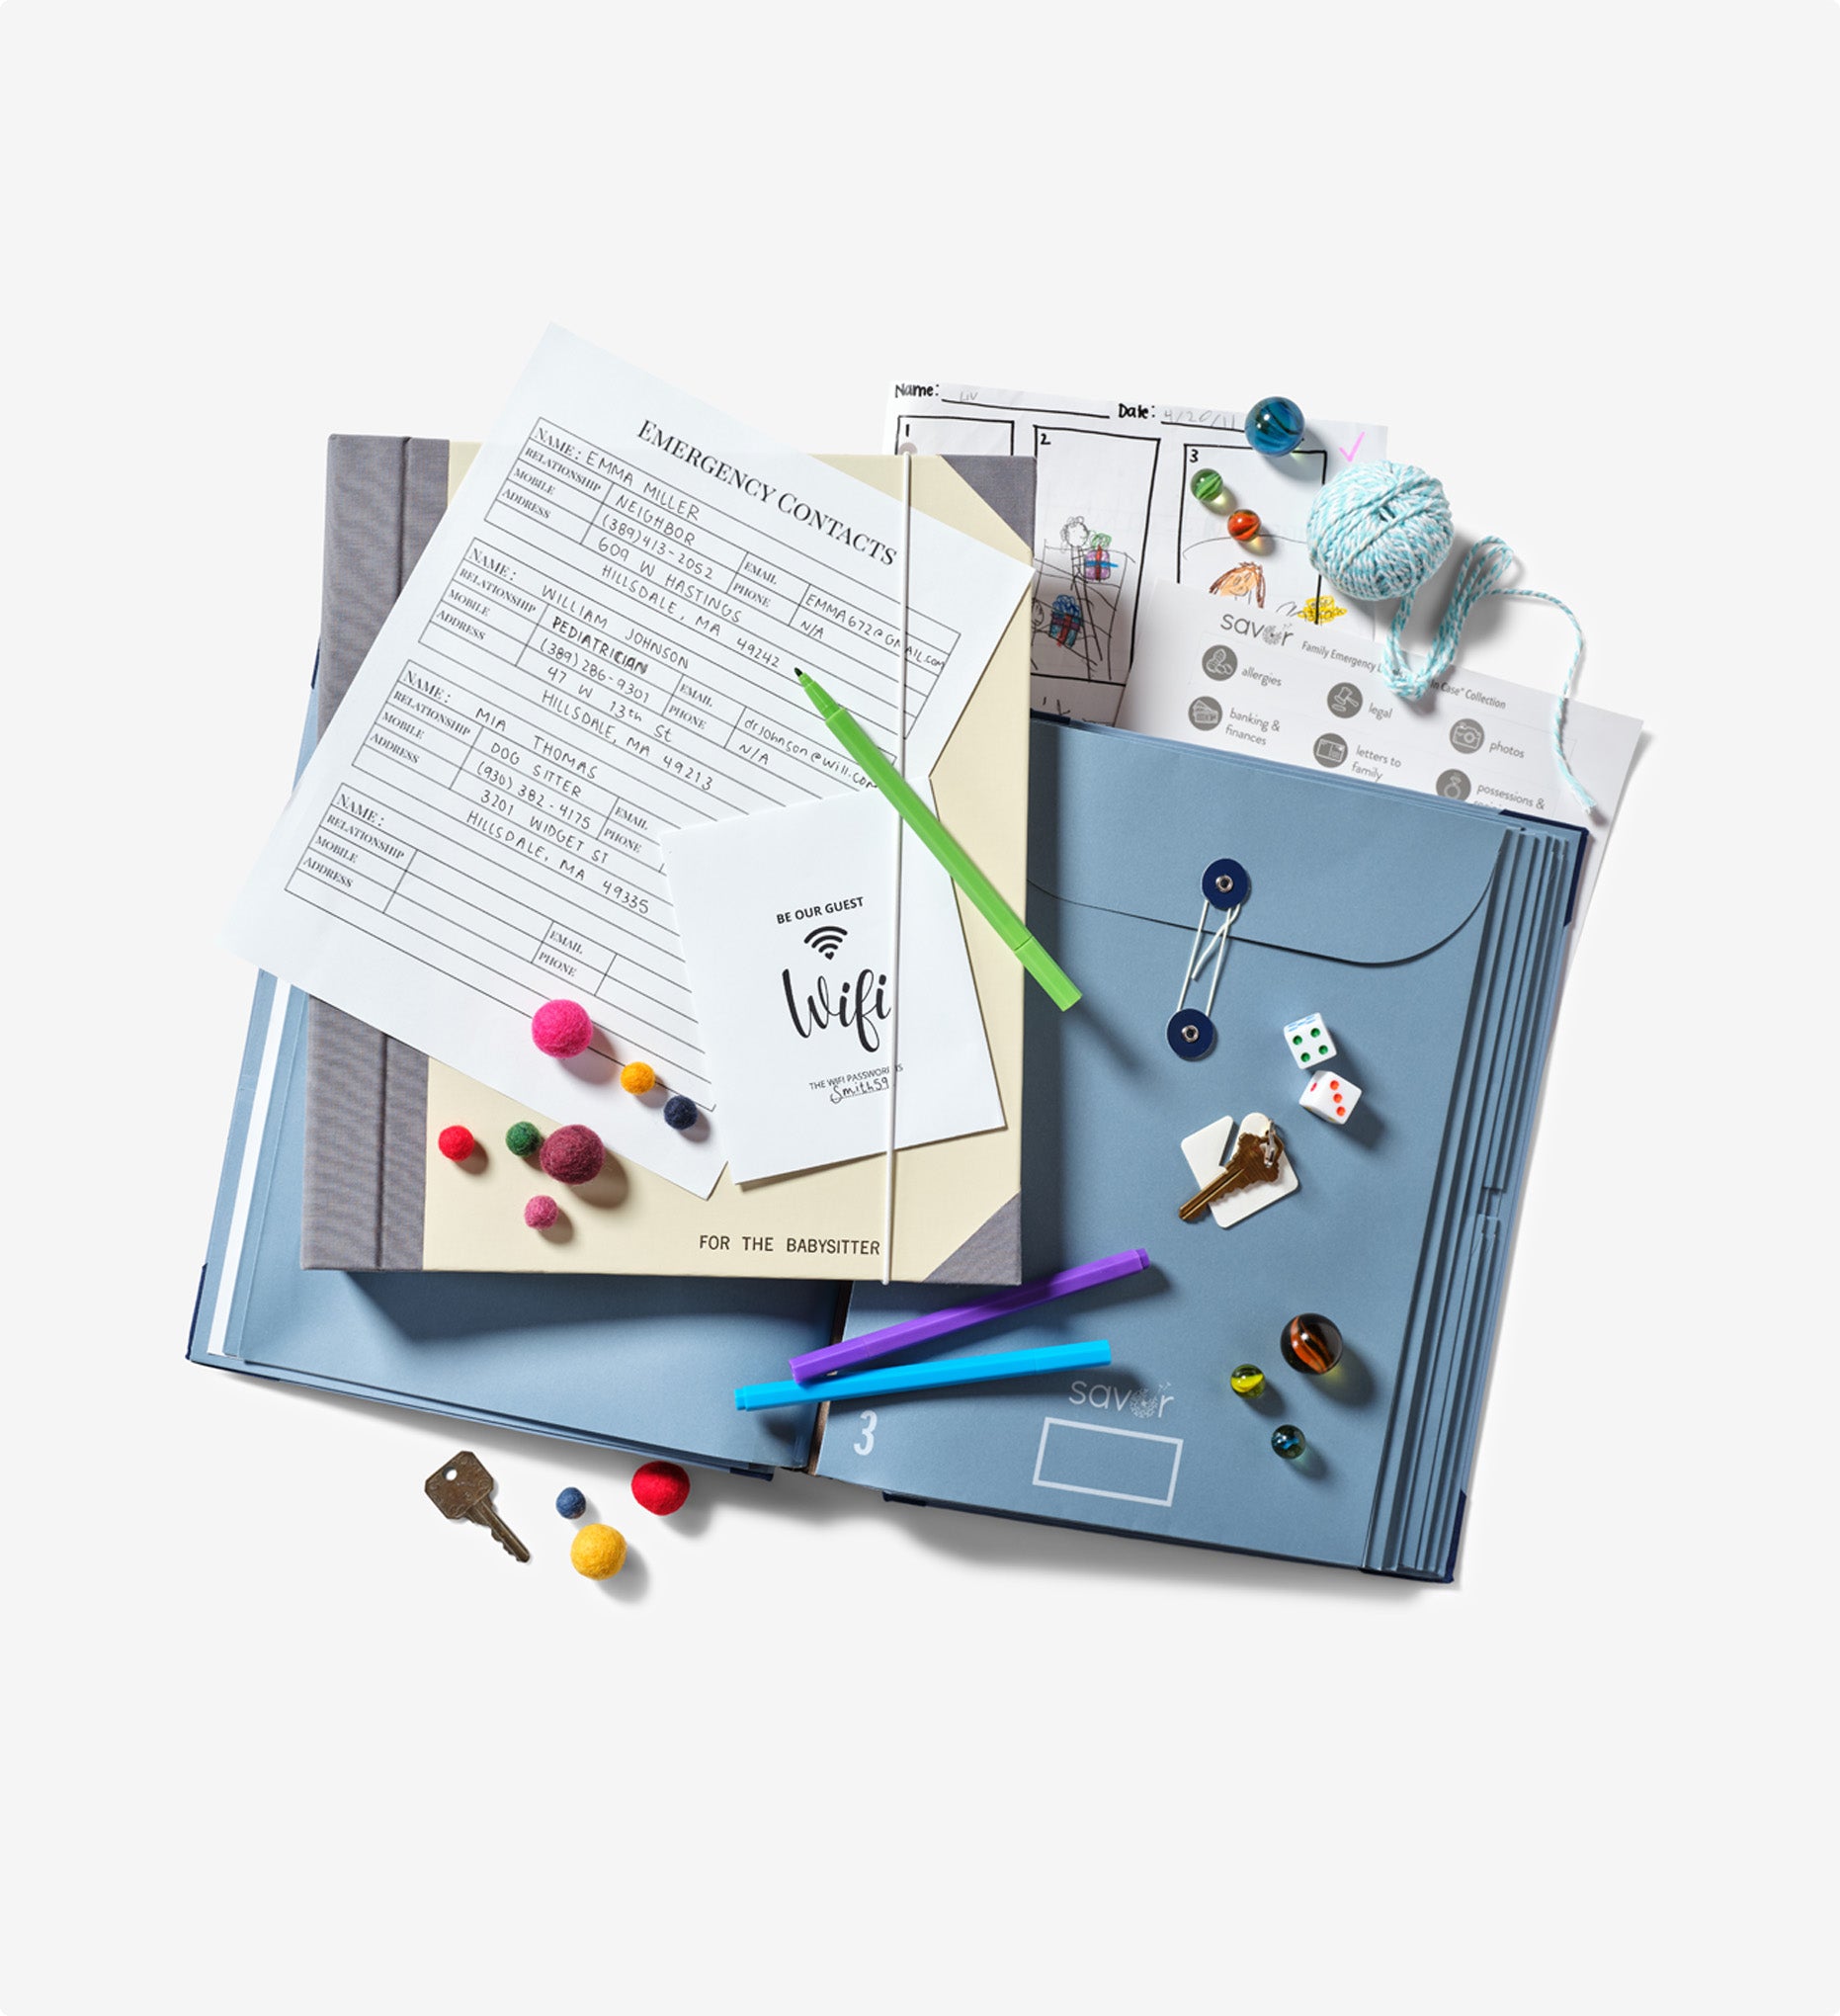 Savor babysitter binders: a blue one open and a slate one closed on top of it, with markers, dice and other items